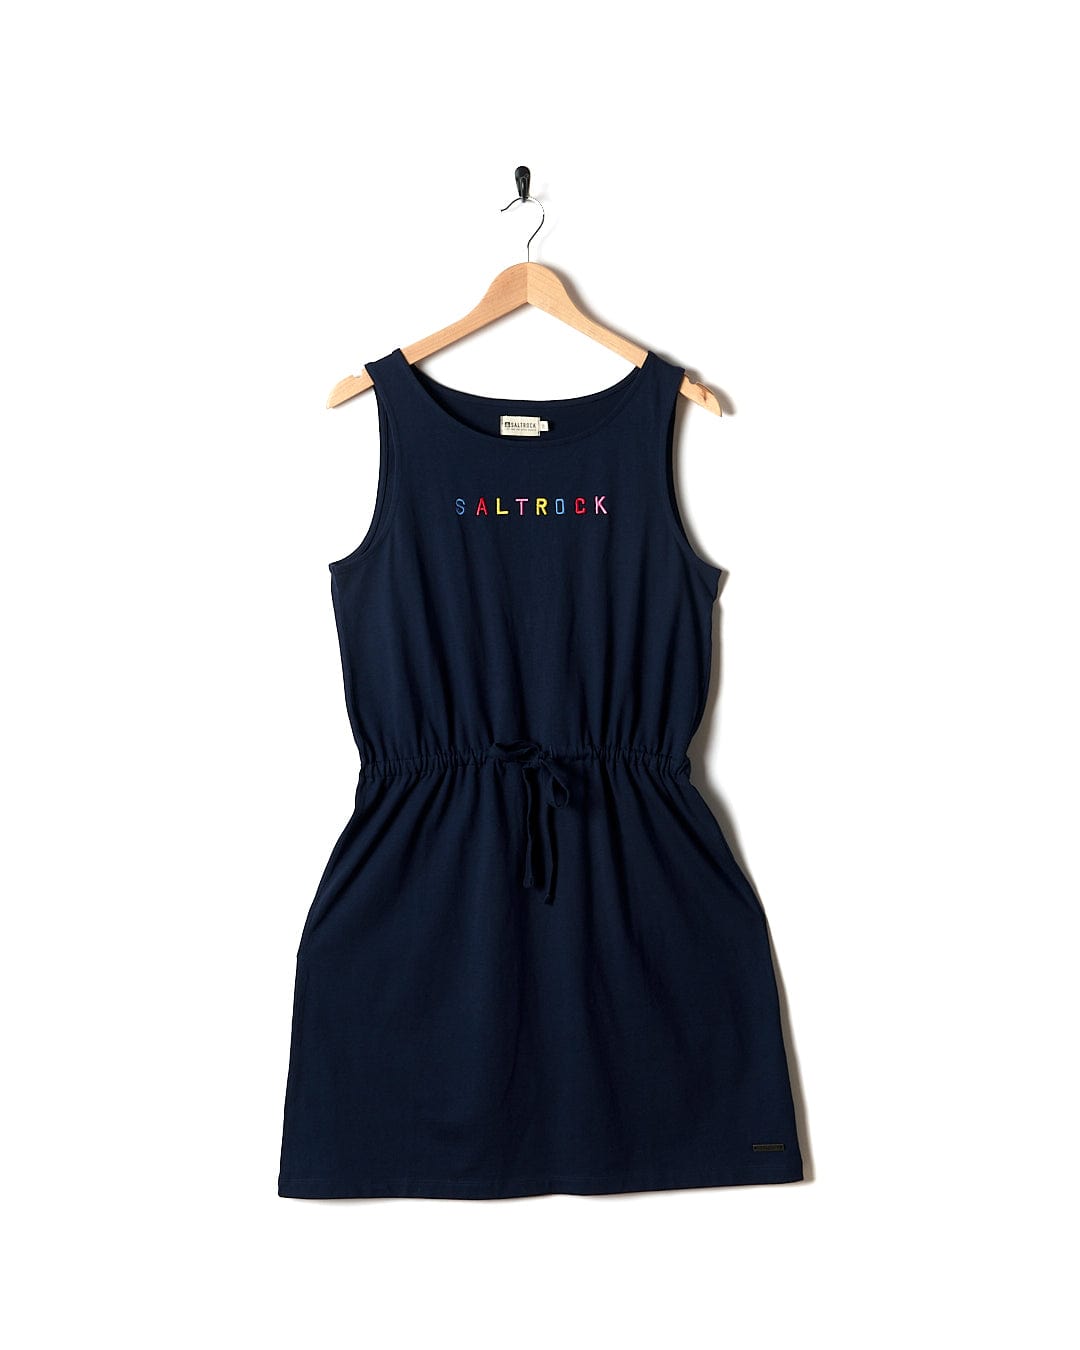 A Flax - Womens Tie Vest Dress - Blue with multicolored letters on it by Saltrock.